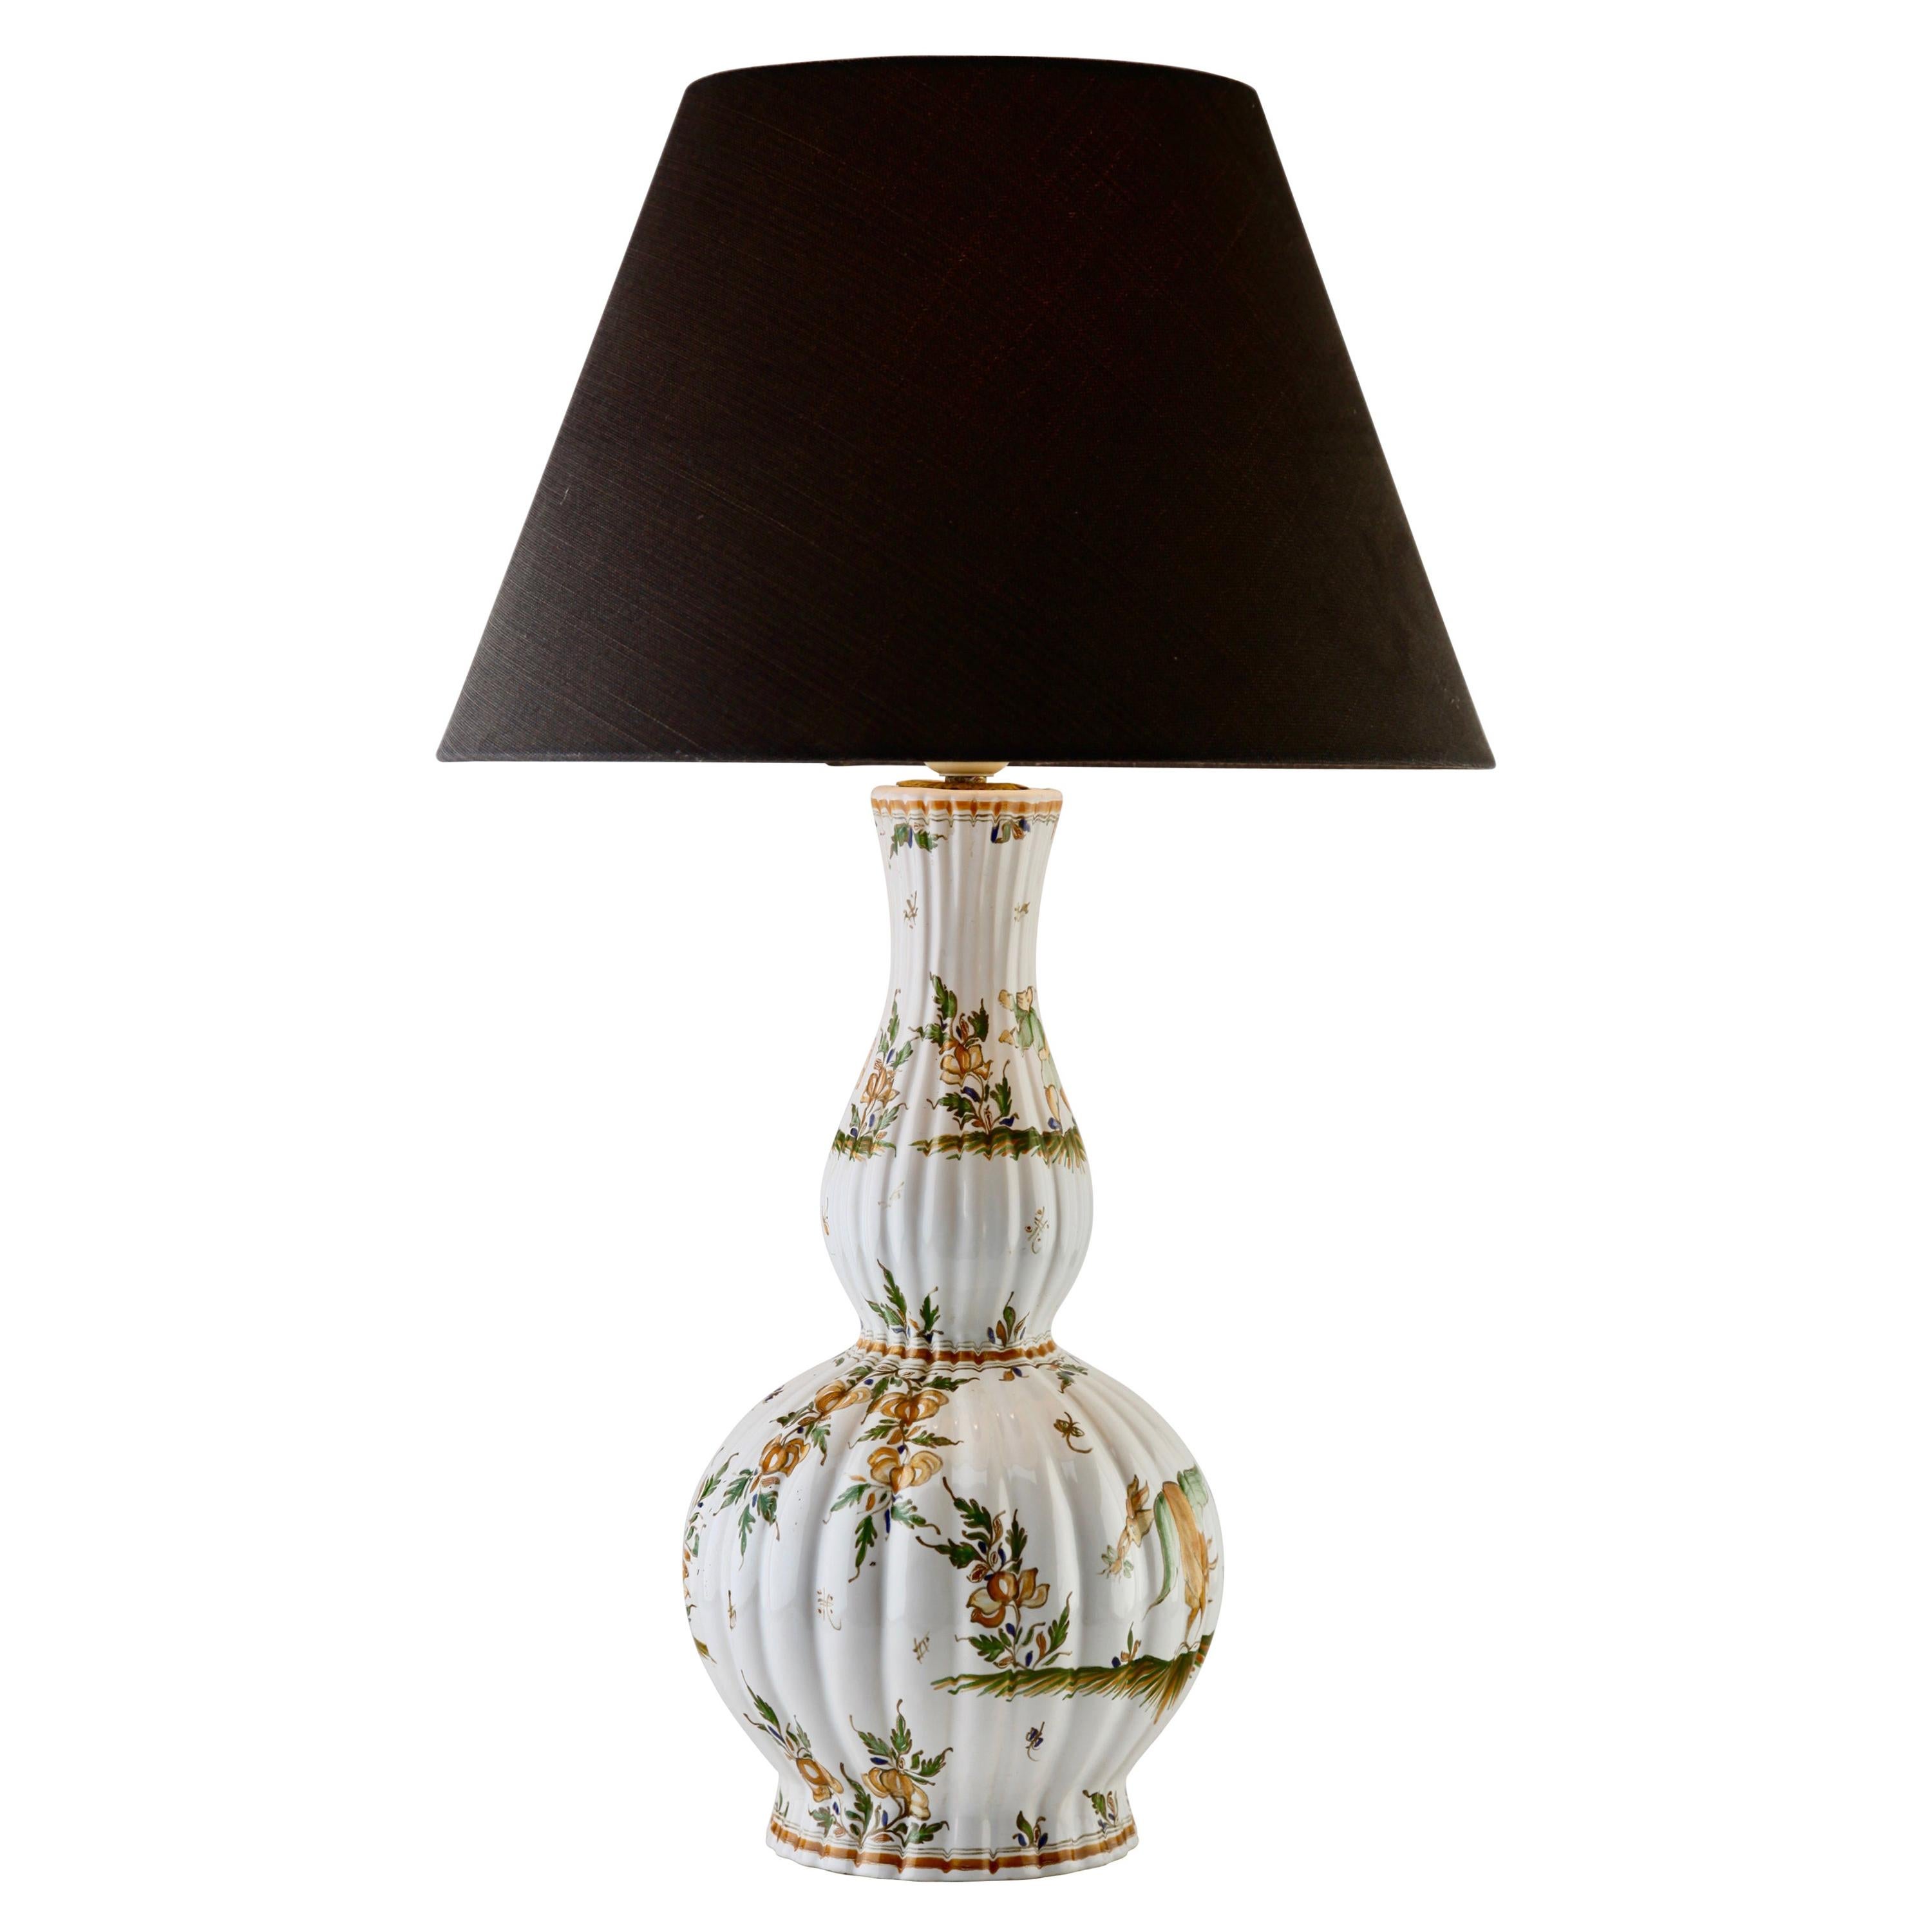 French Ceramic Table Lamp with Hand Painted Decoration, 1930s